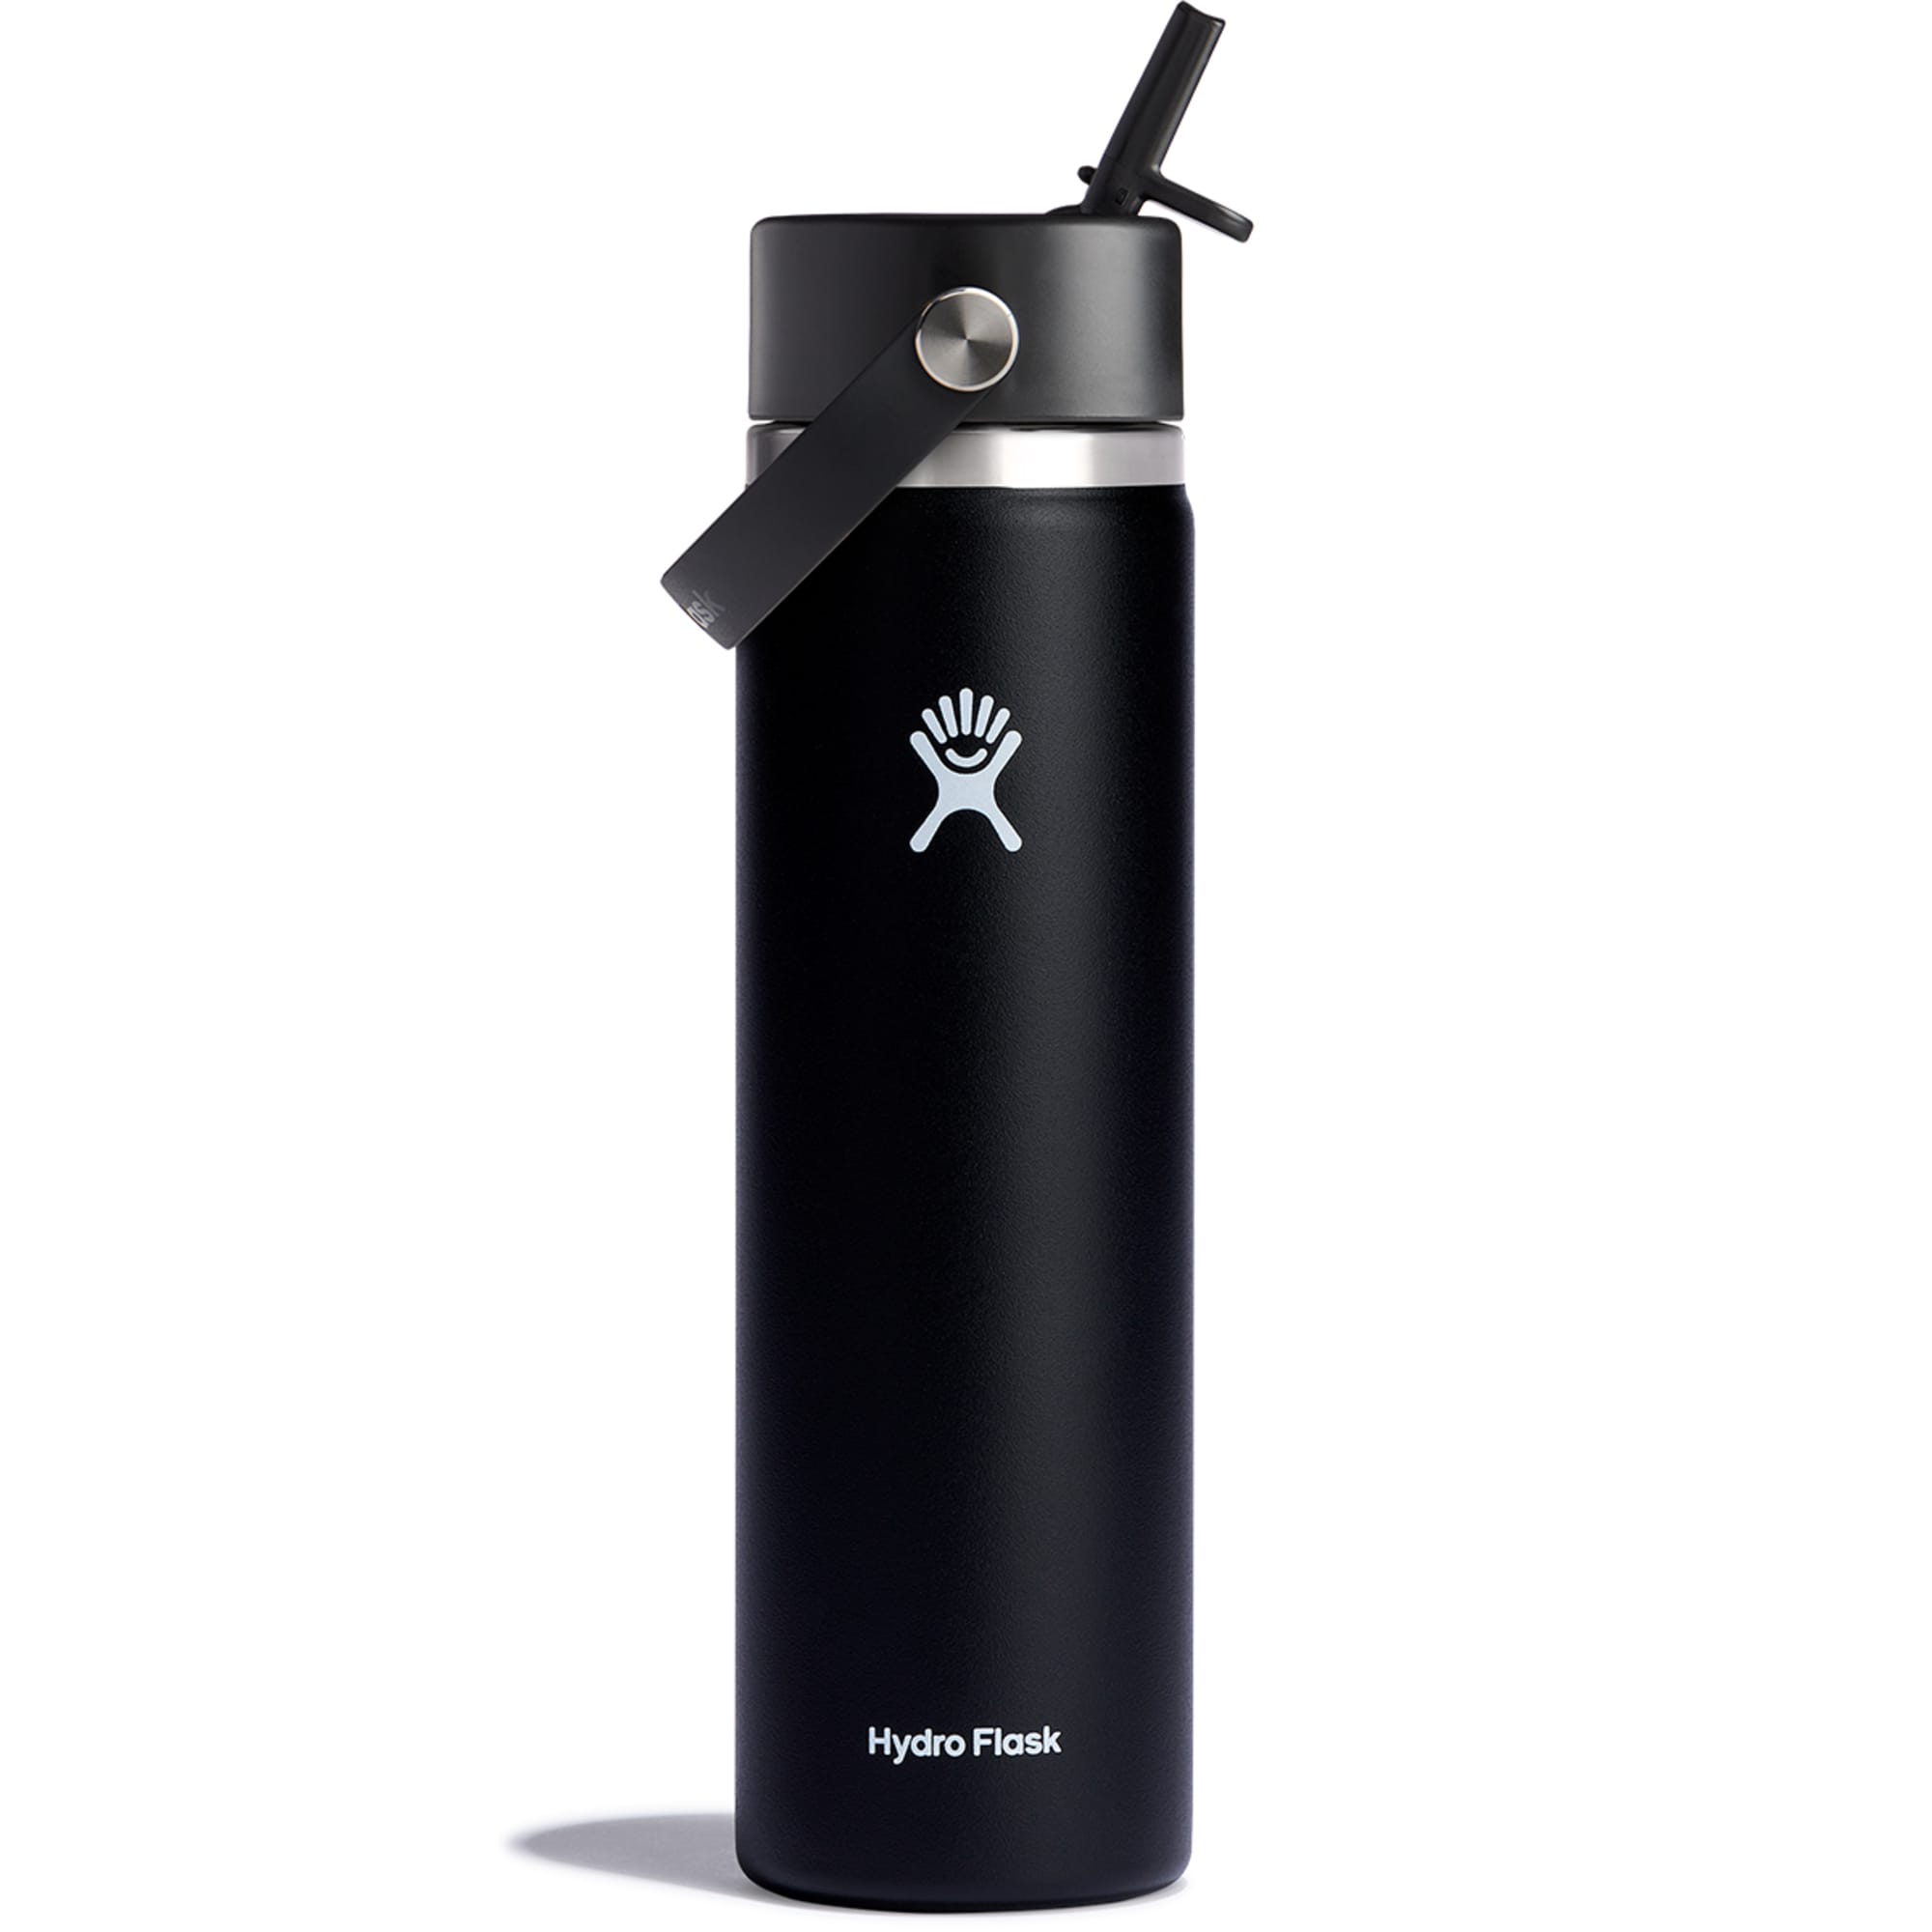 24oz Wide Mouth Water Bottles - Cuptify